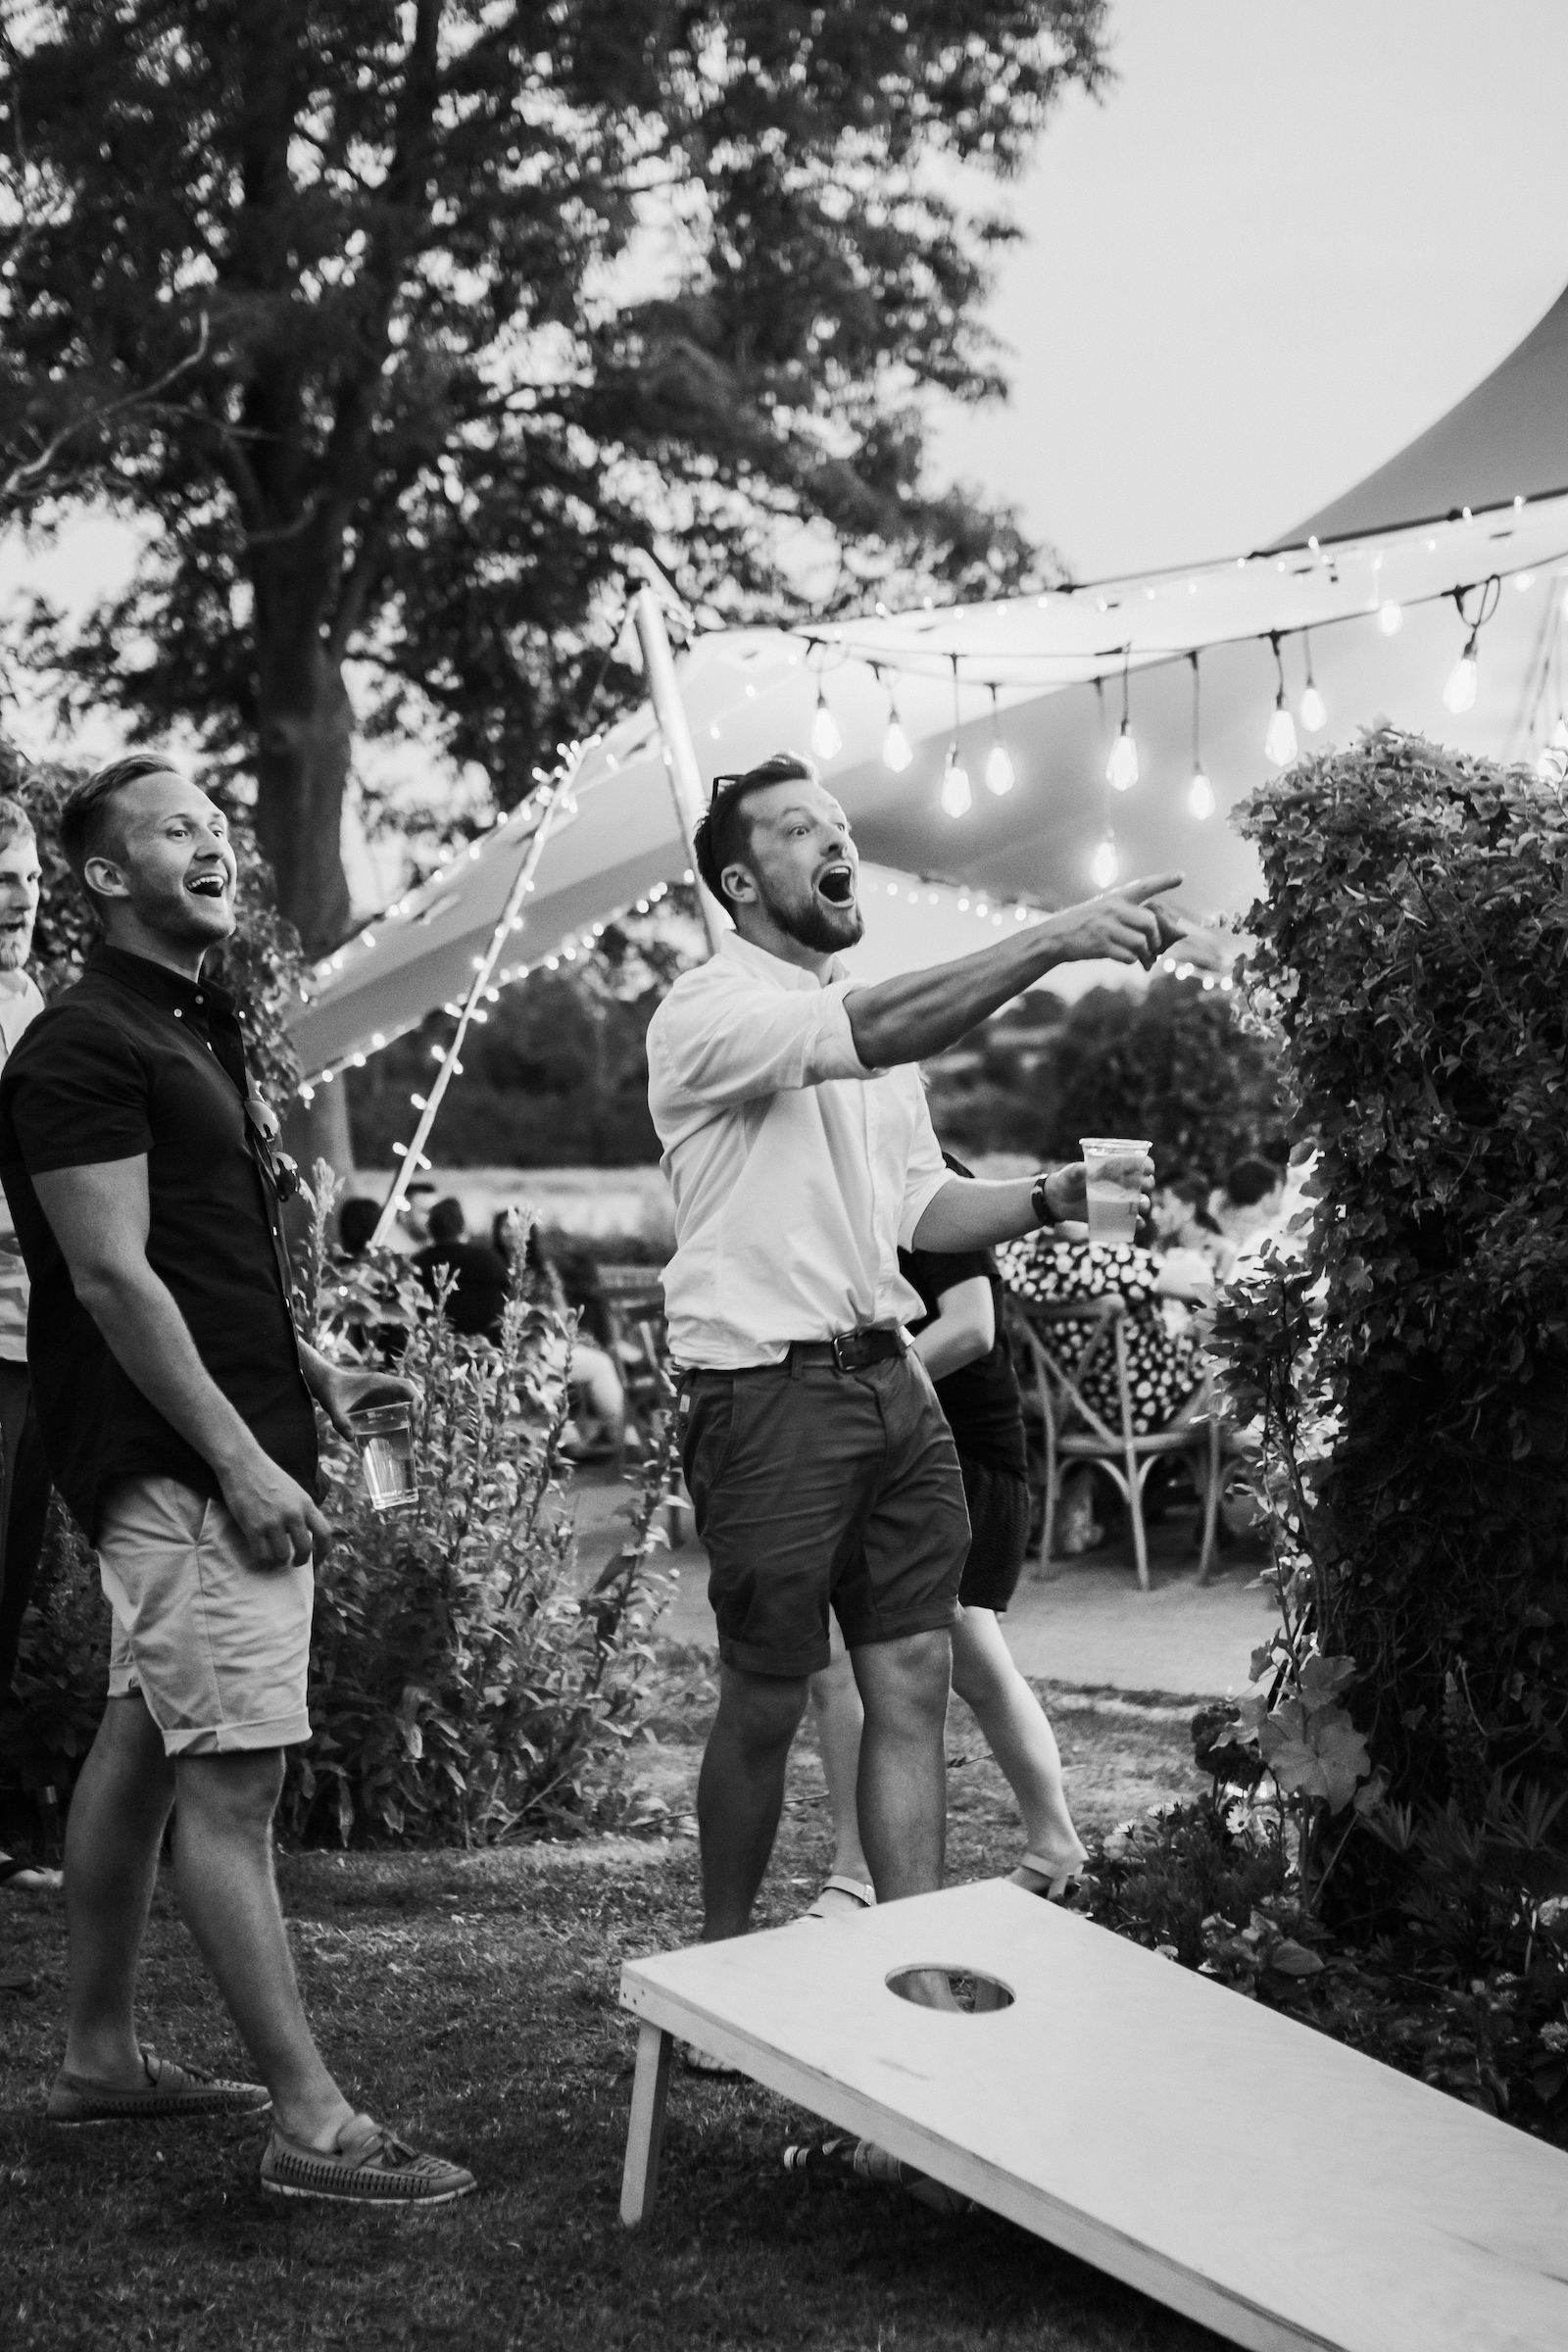 Black and white image of two men playing garden game at wedding